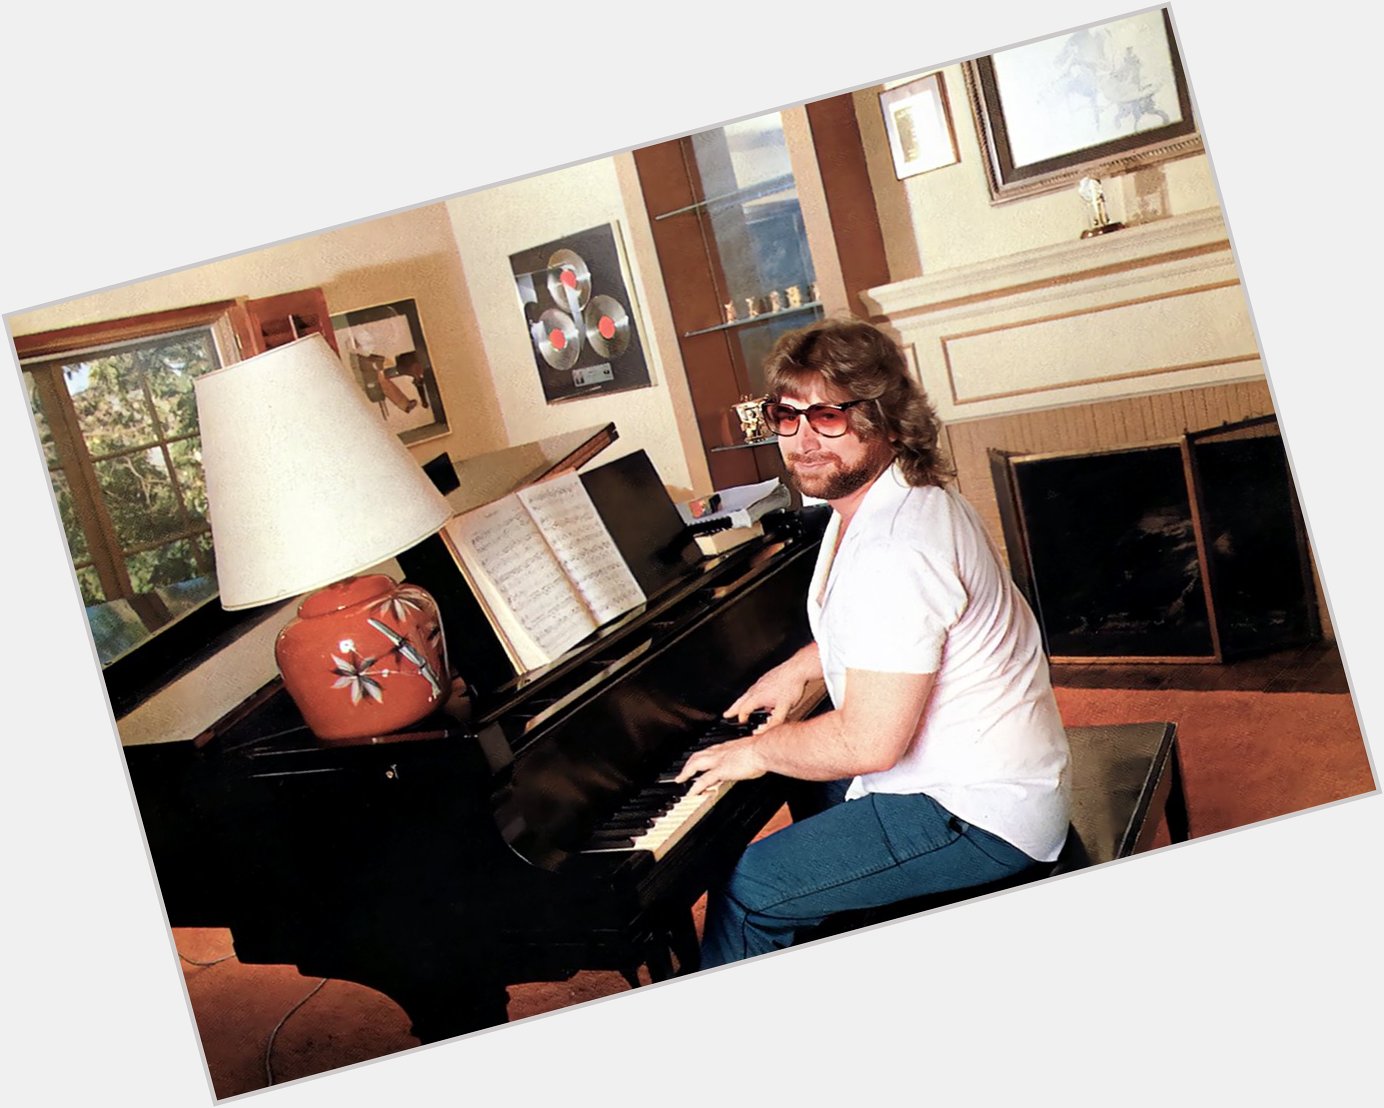 Happy Birthday to David Paich who turns 69 years young today - pictured here at his Los Angeles home in 1982 